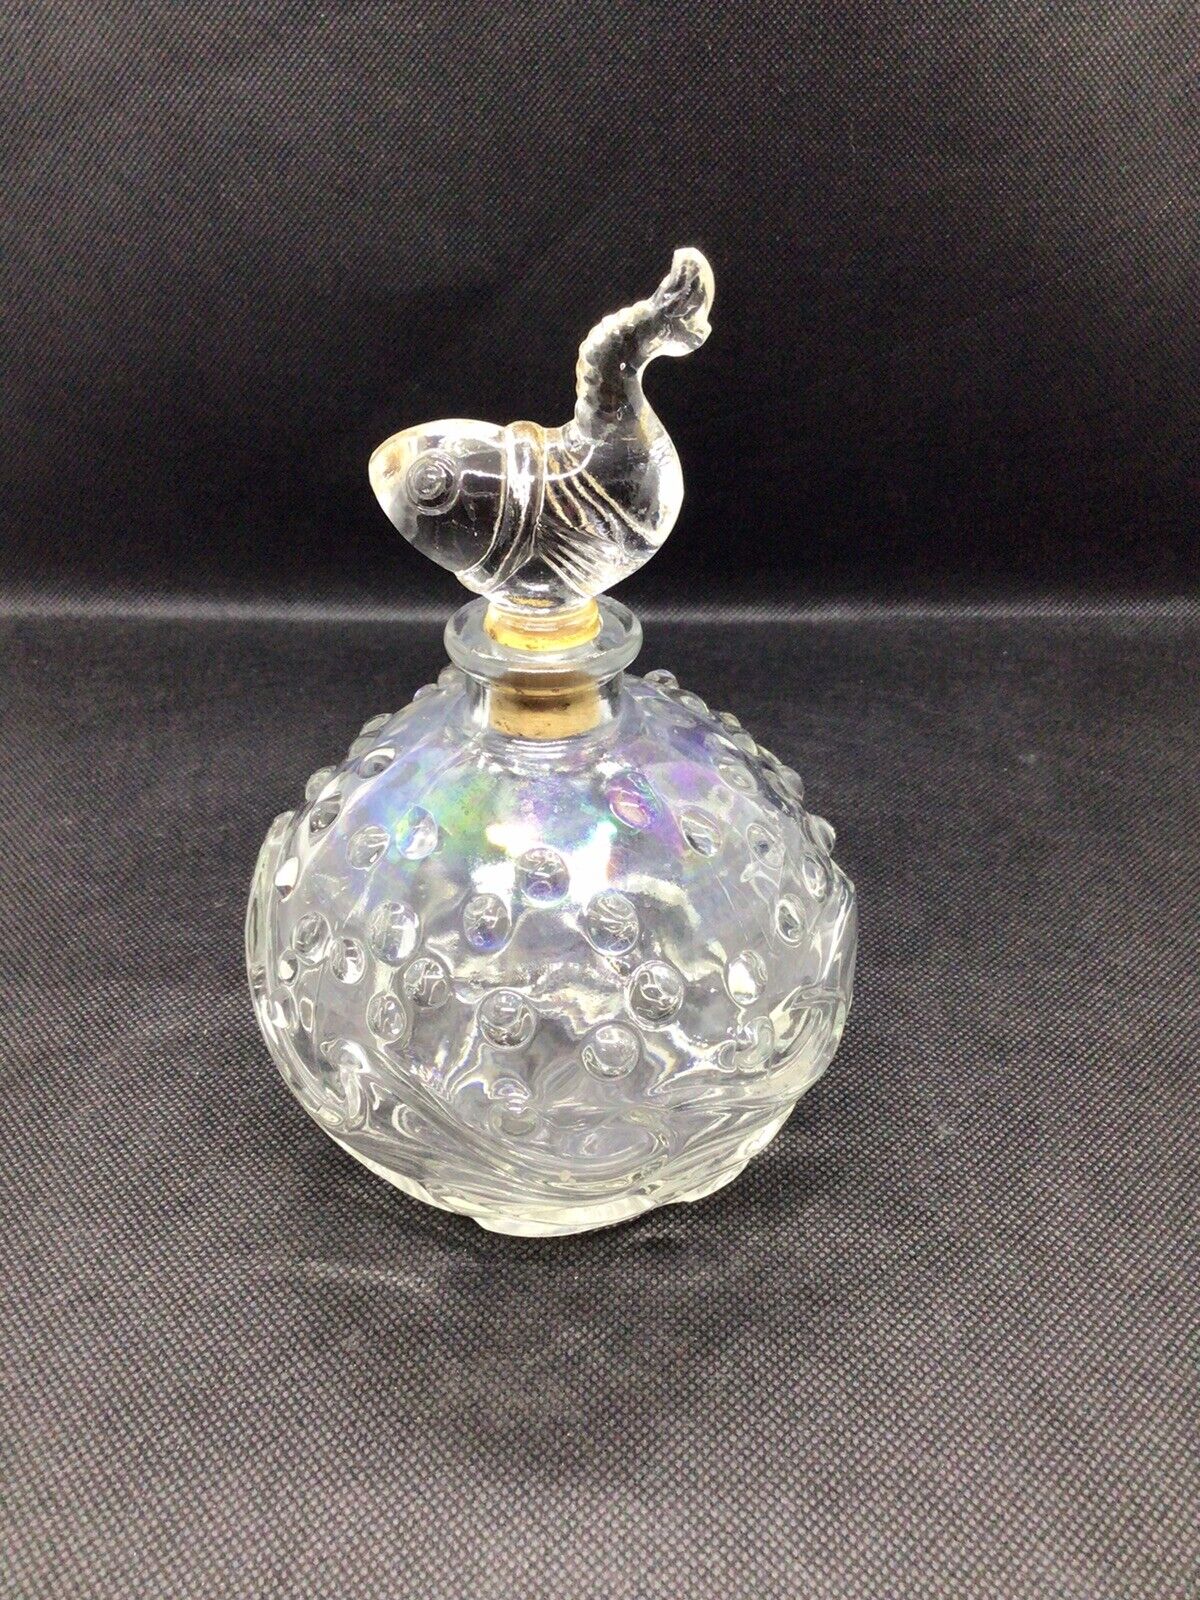 Vintage Art Deco Bottle With Fish Stopper. Has Some Iridescents